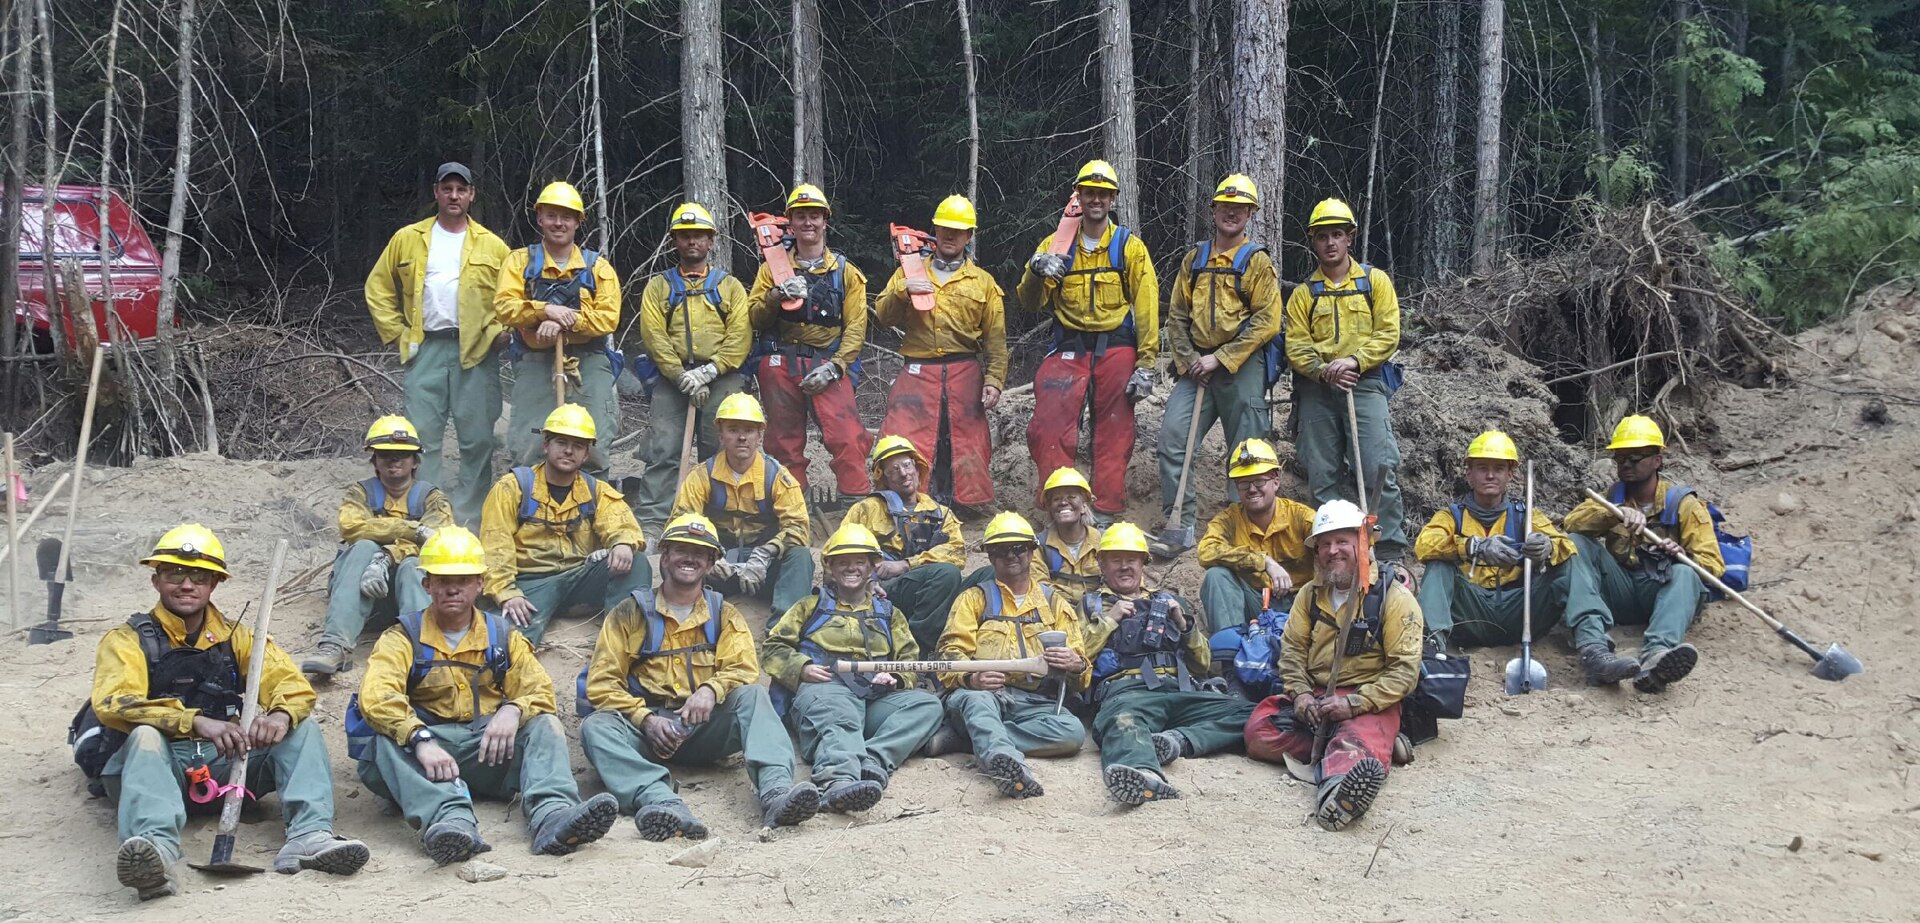 Group photo of Washington National Guard members and civilian wildfire fighters working together at the Sheep Creek Fire in August 2018.